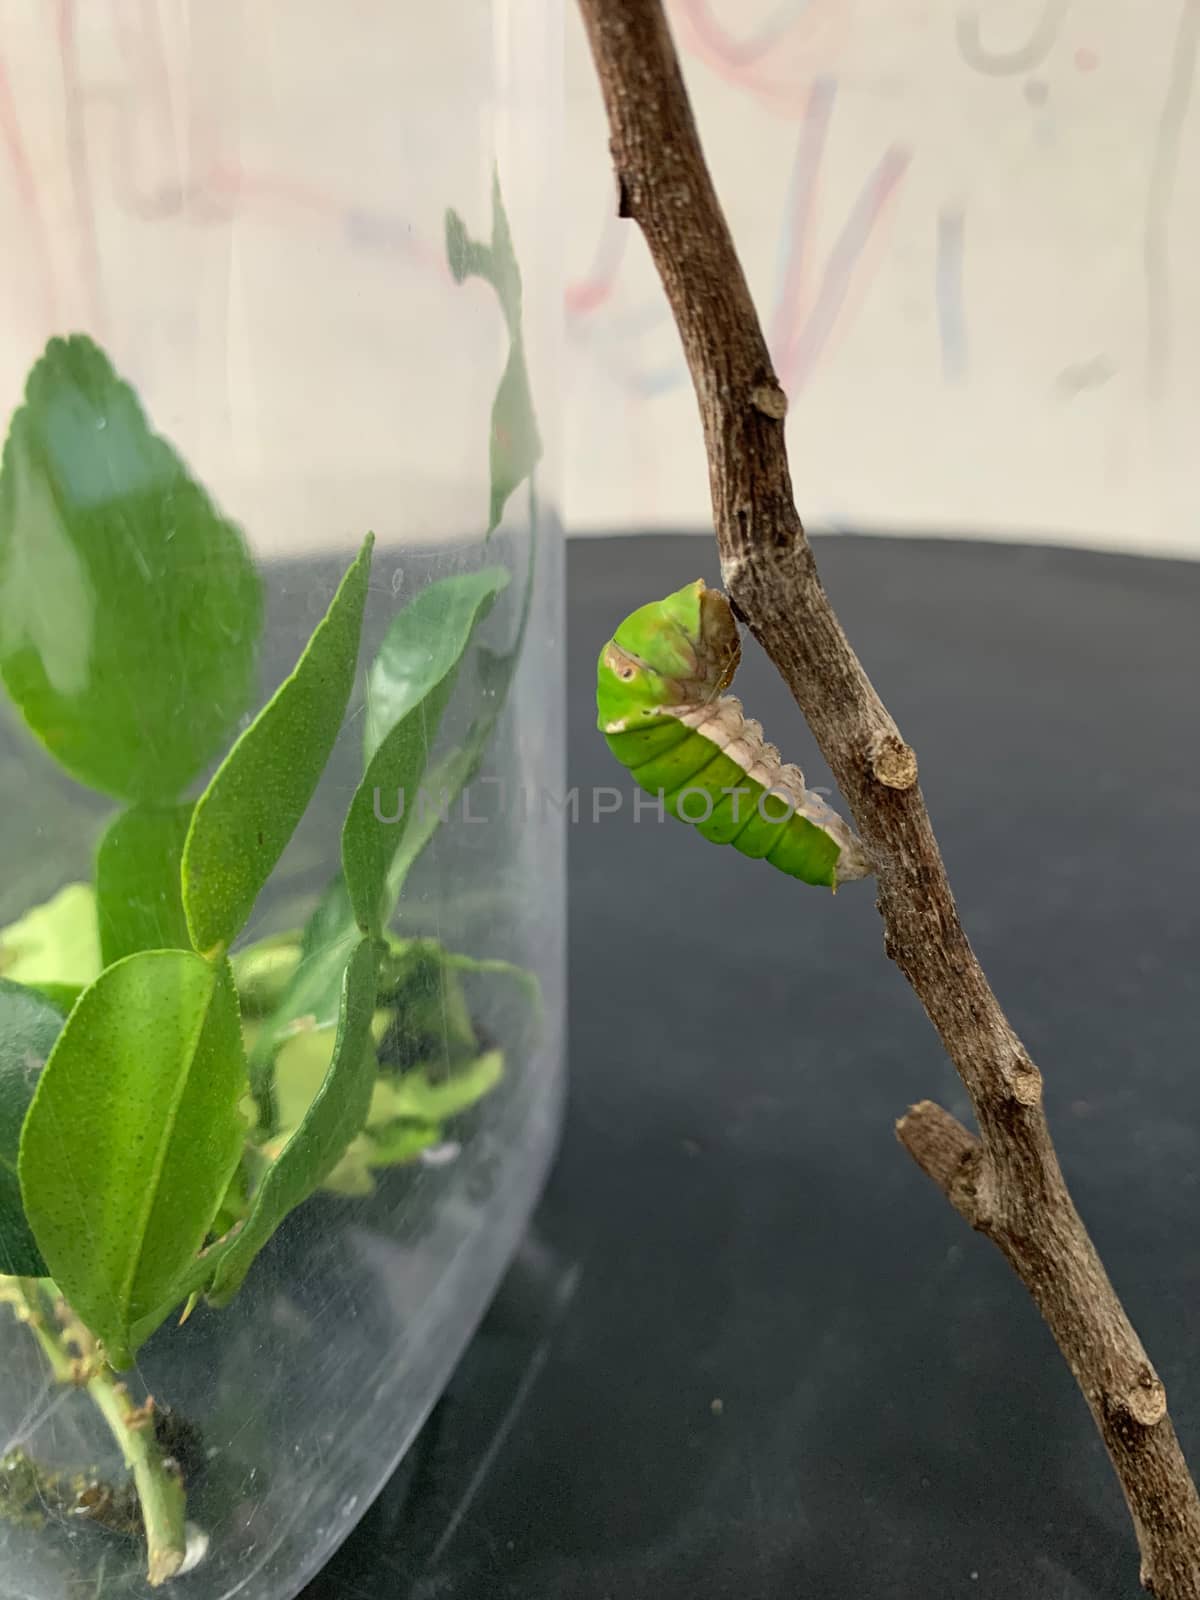 Kaffir lime leaf caterpillars are transformed into a pupa hanging from the branches.